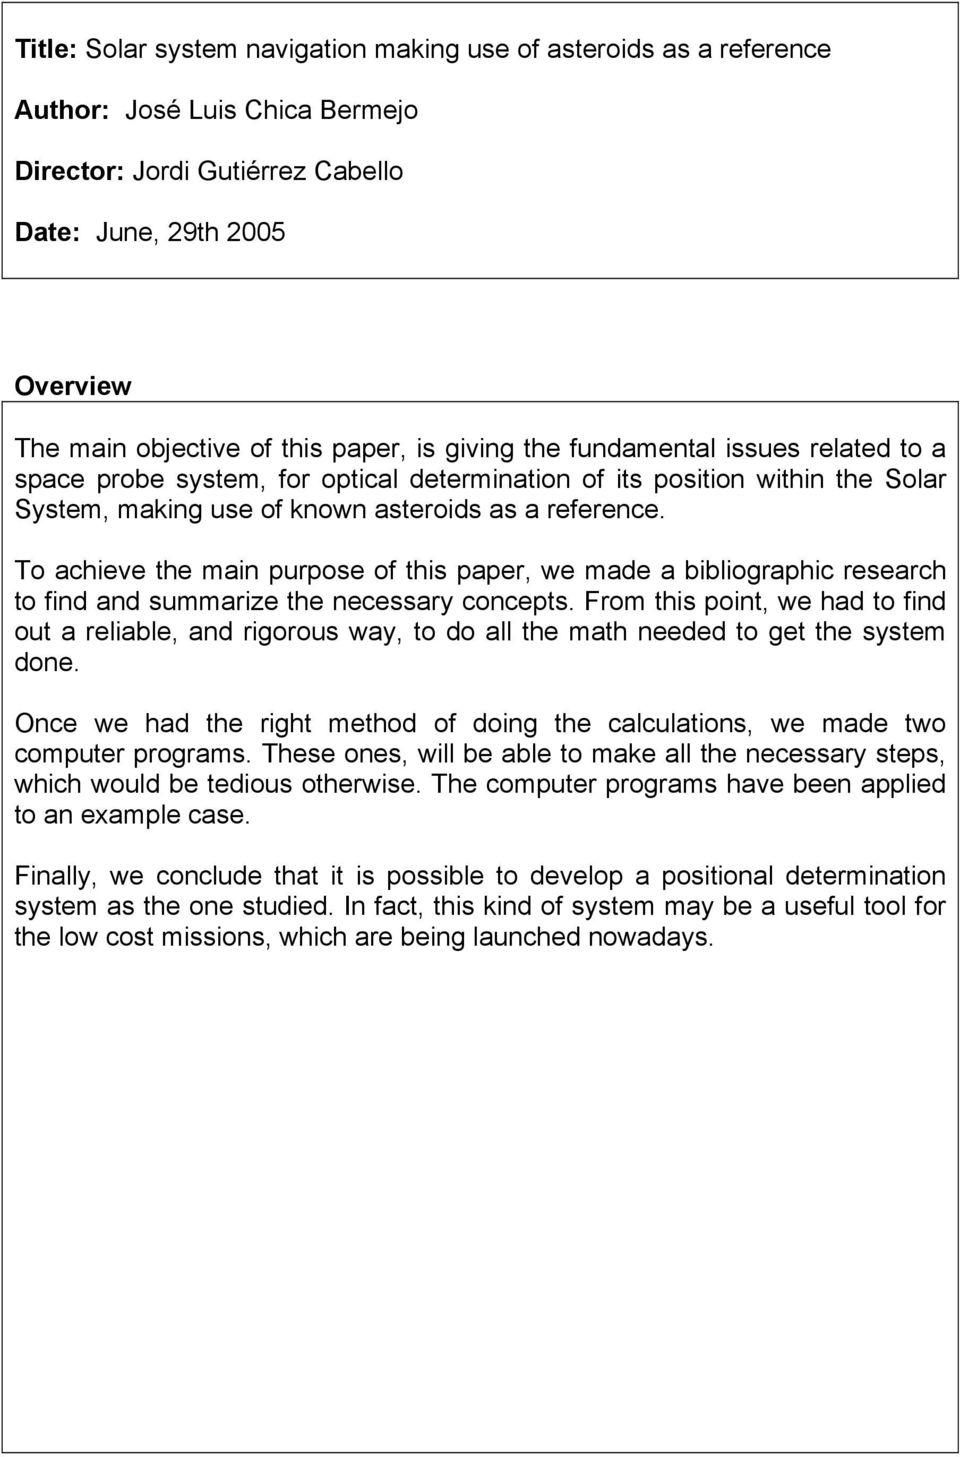 To aheve the man purpose of ths paper, we made a bblograph researh to fnd and summarze the neessary onepts.